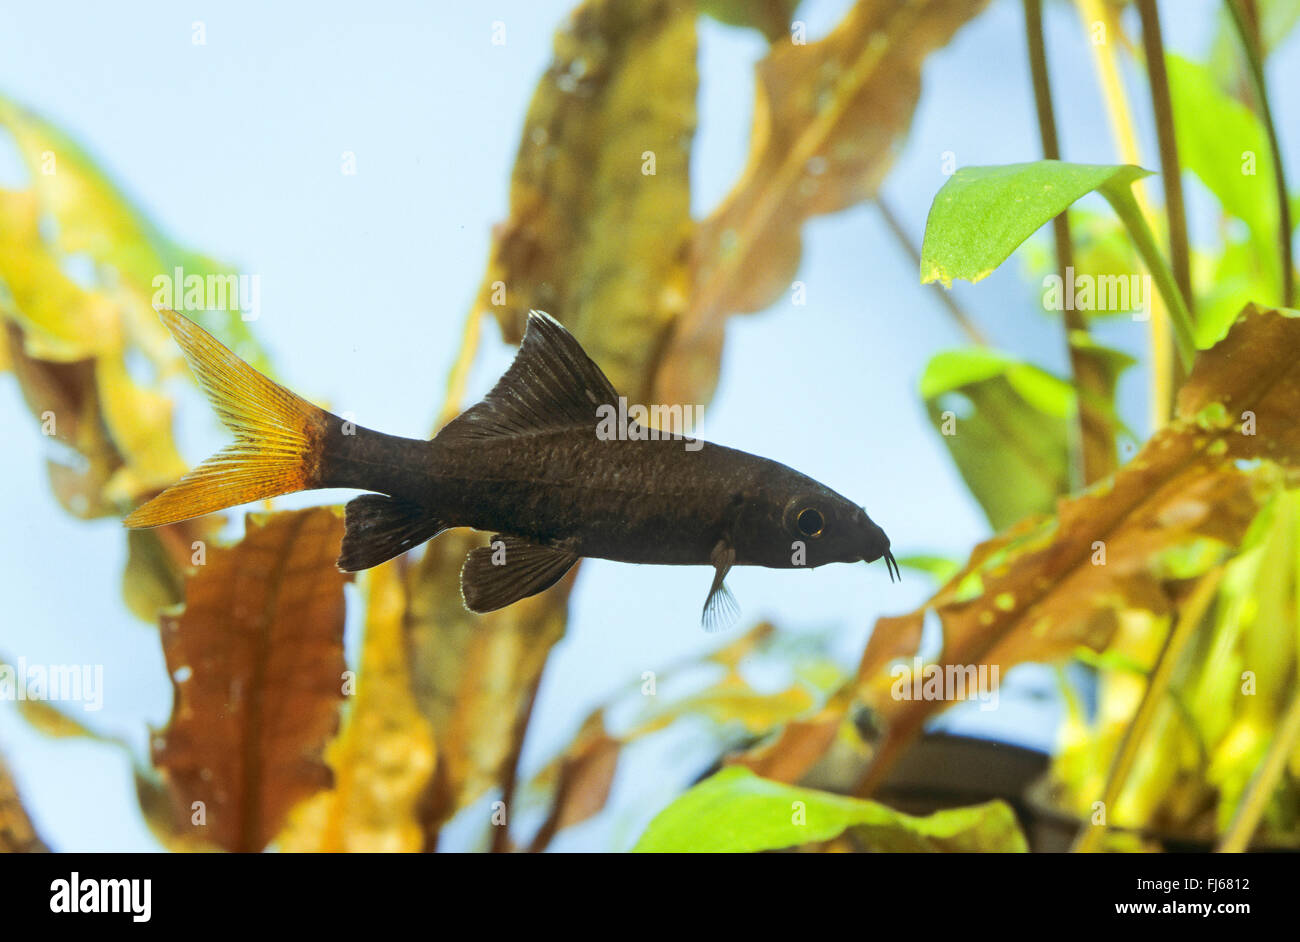 redtail sharkminnow, red-tailed shark, redtailed shark, red-tailed black shark, redtailed black shark, redtailed labeo, fire tail redtail sharkminnow (Epalzeorhynchos bicolor, Epalzeorhynchus bicolor, Labeo bicolor), swimming Stock Photo